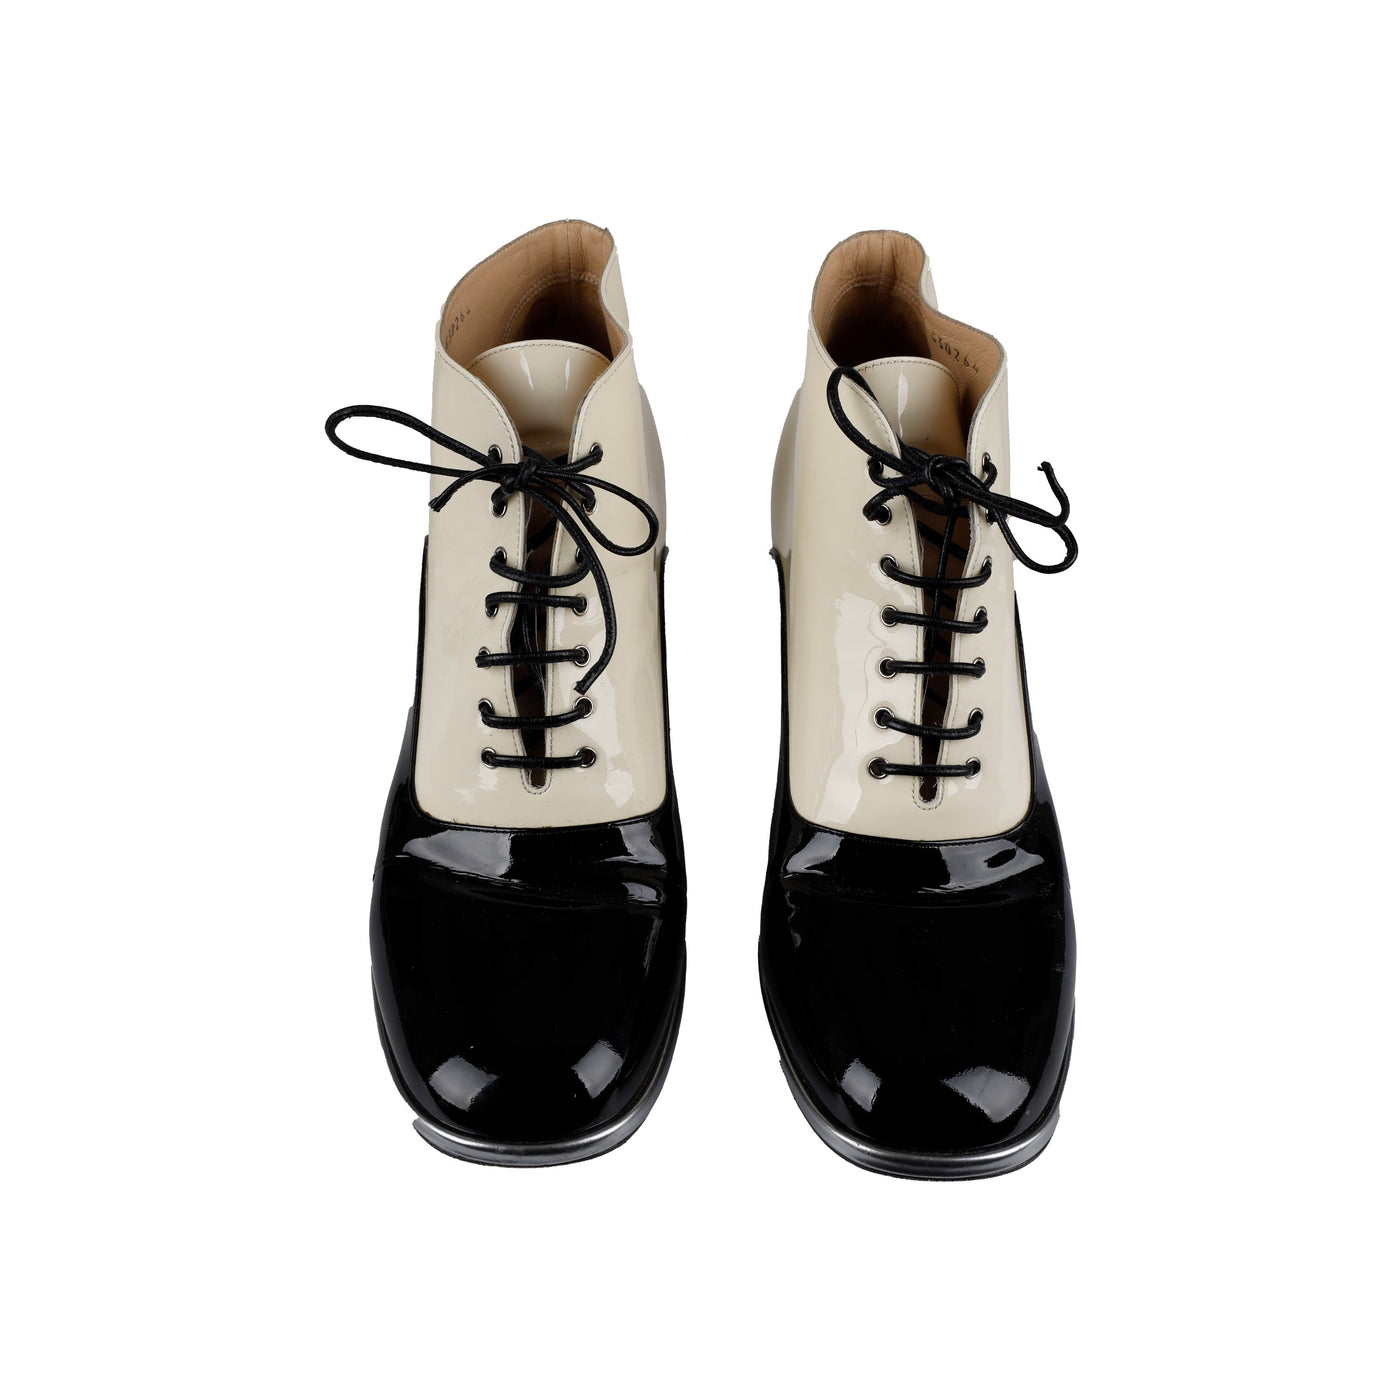 Secondhand Chanel Patent Leather Bow Lace-Up Ankle Boots